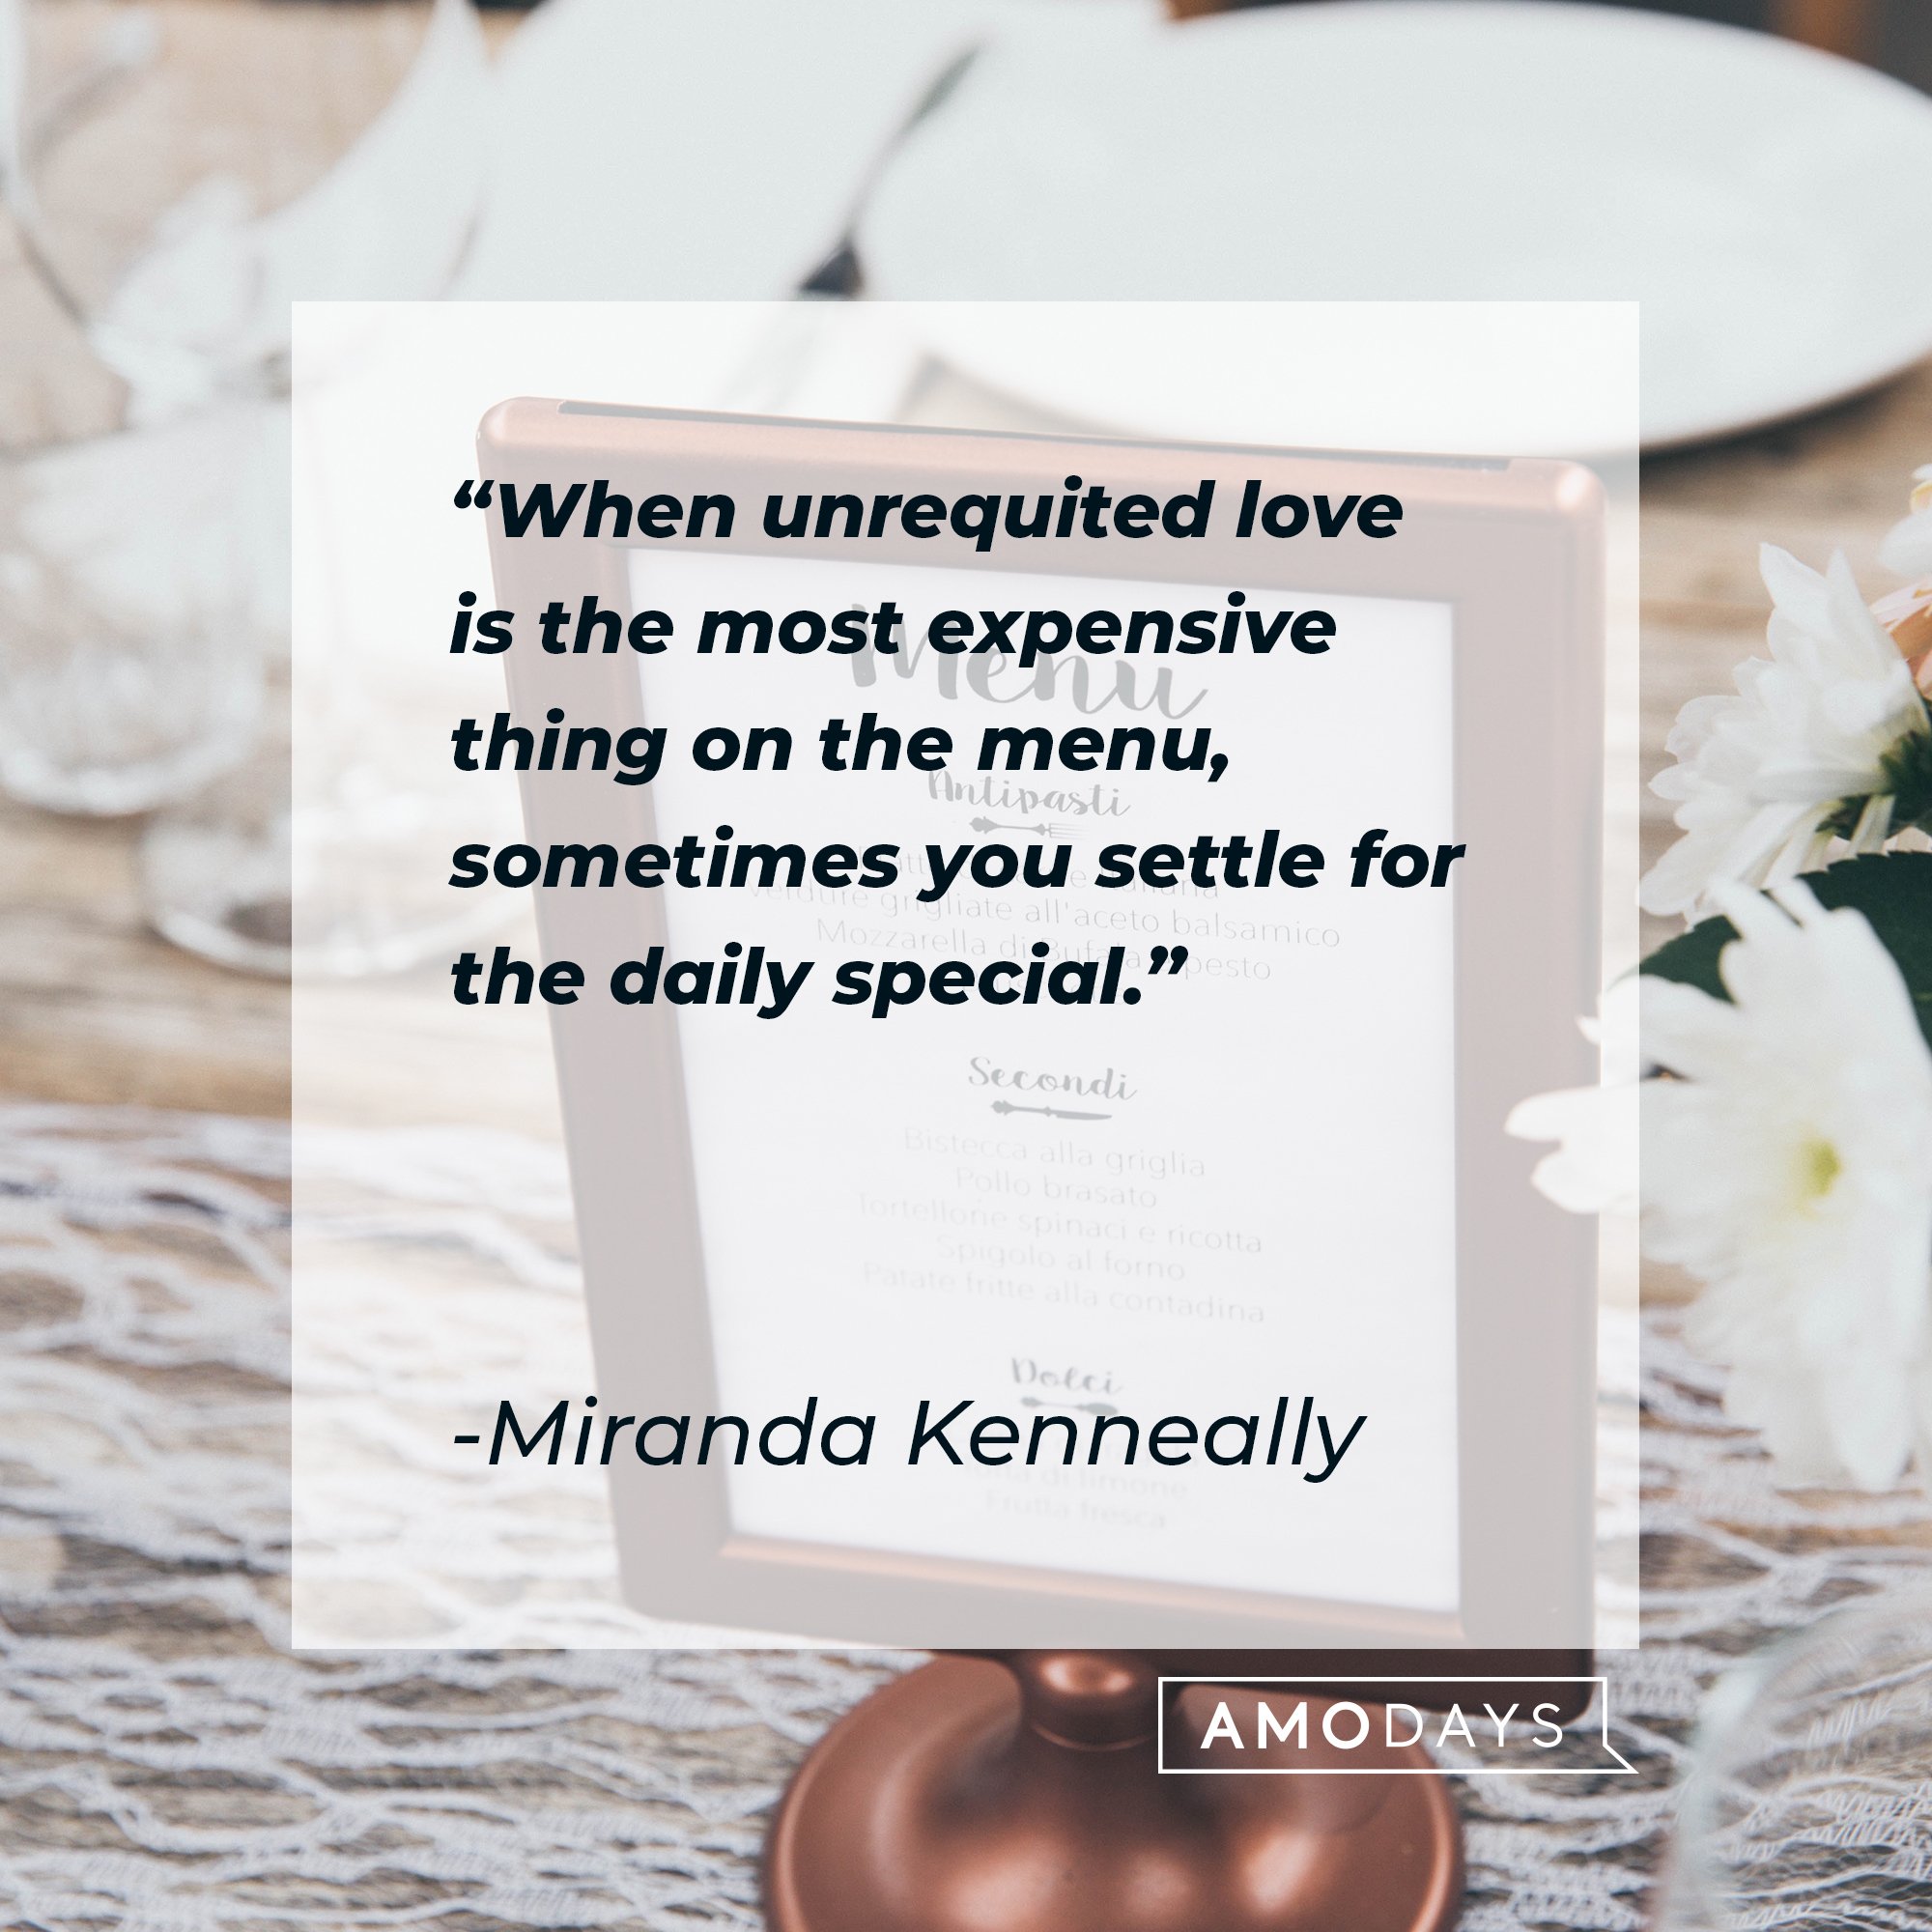 Miranda Kenneally’s quote: "When unrequited love is the most expensive thing on the menu, sometimes you settle for the daily special." | Image: AmoDays